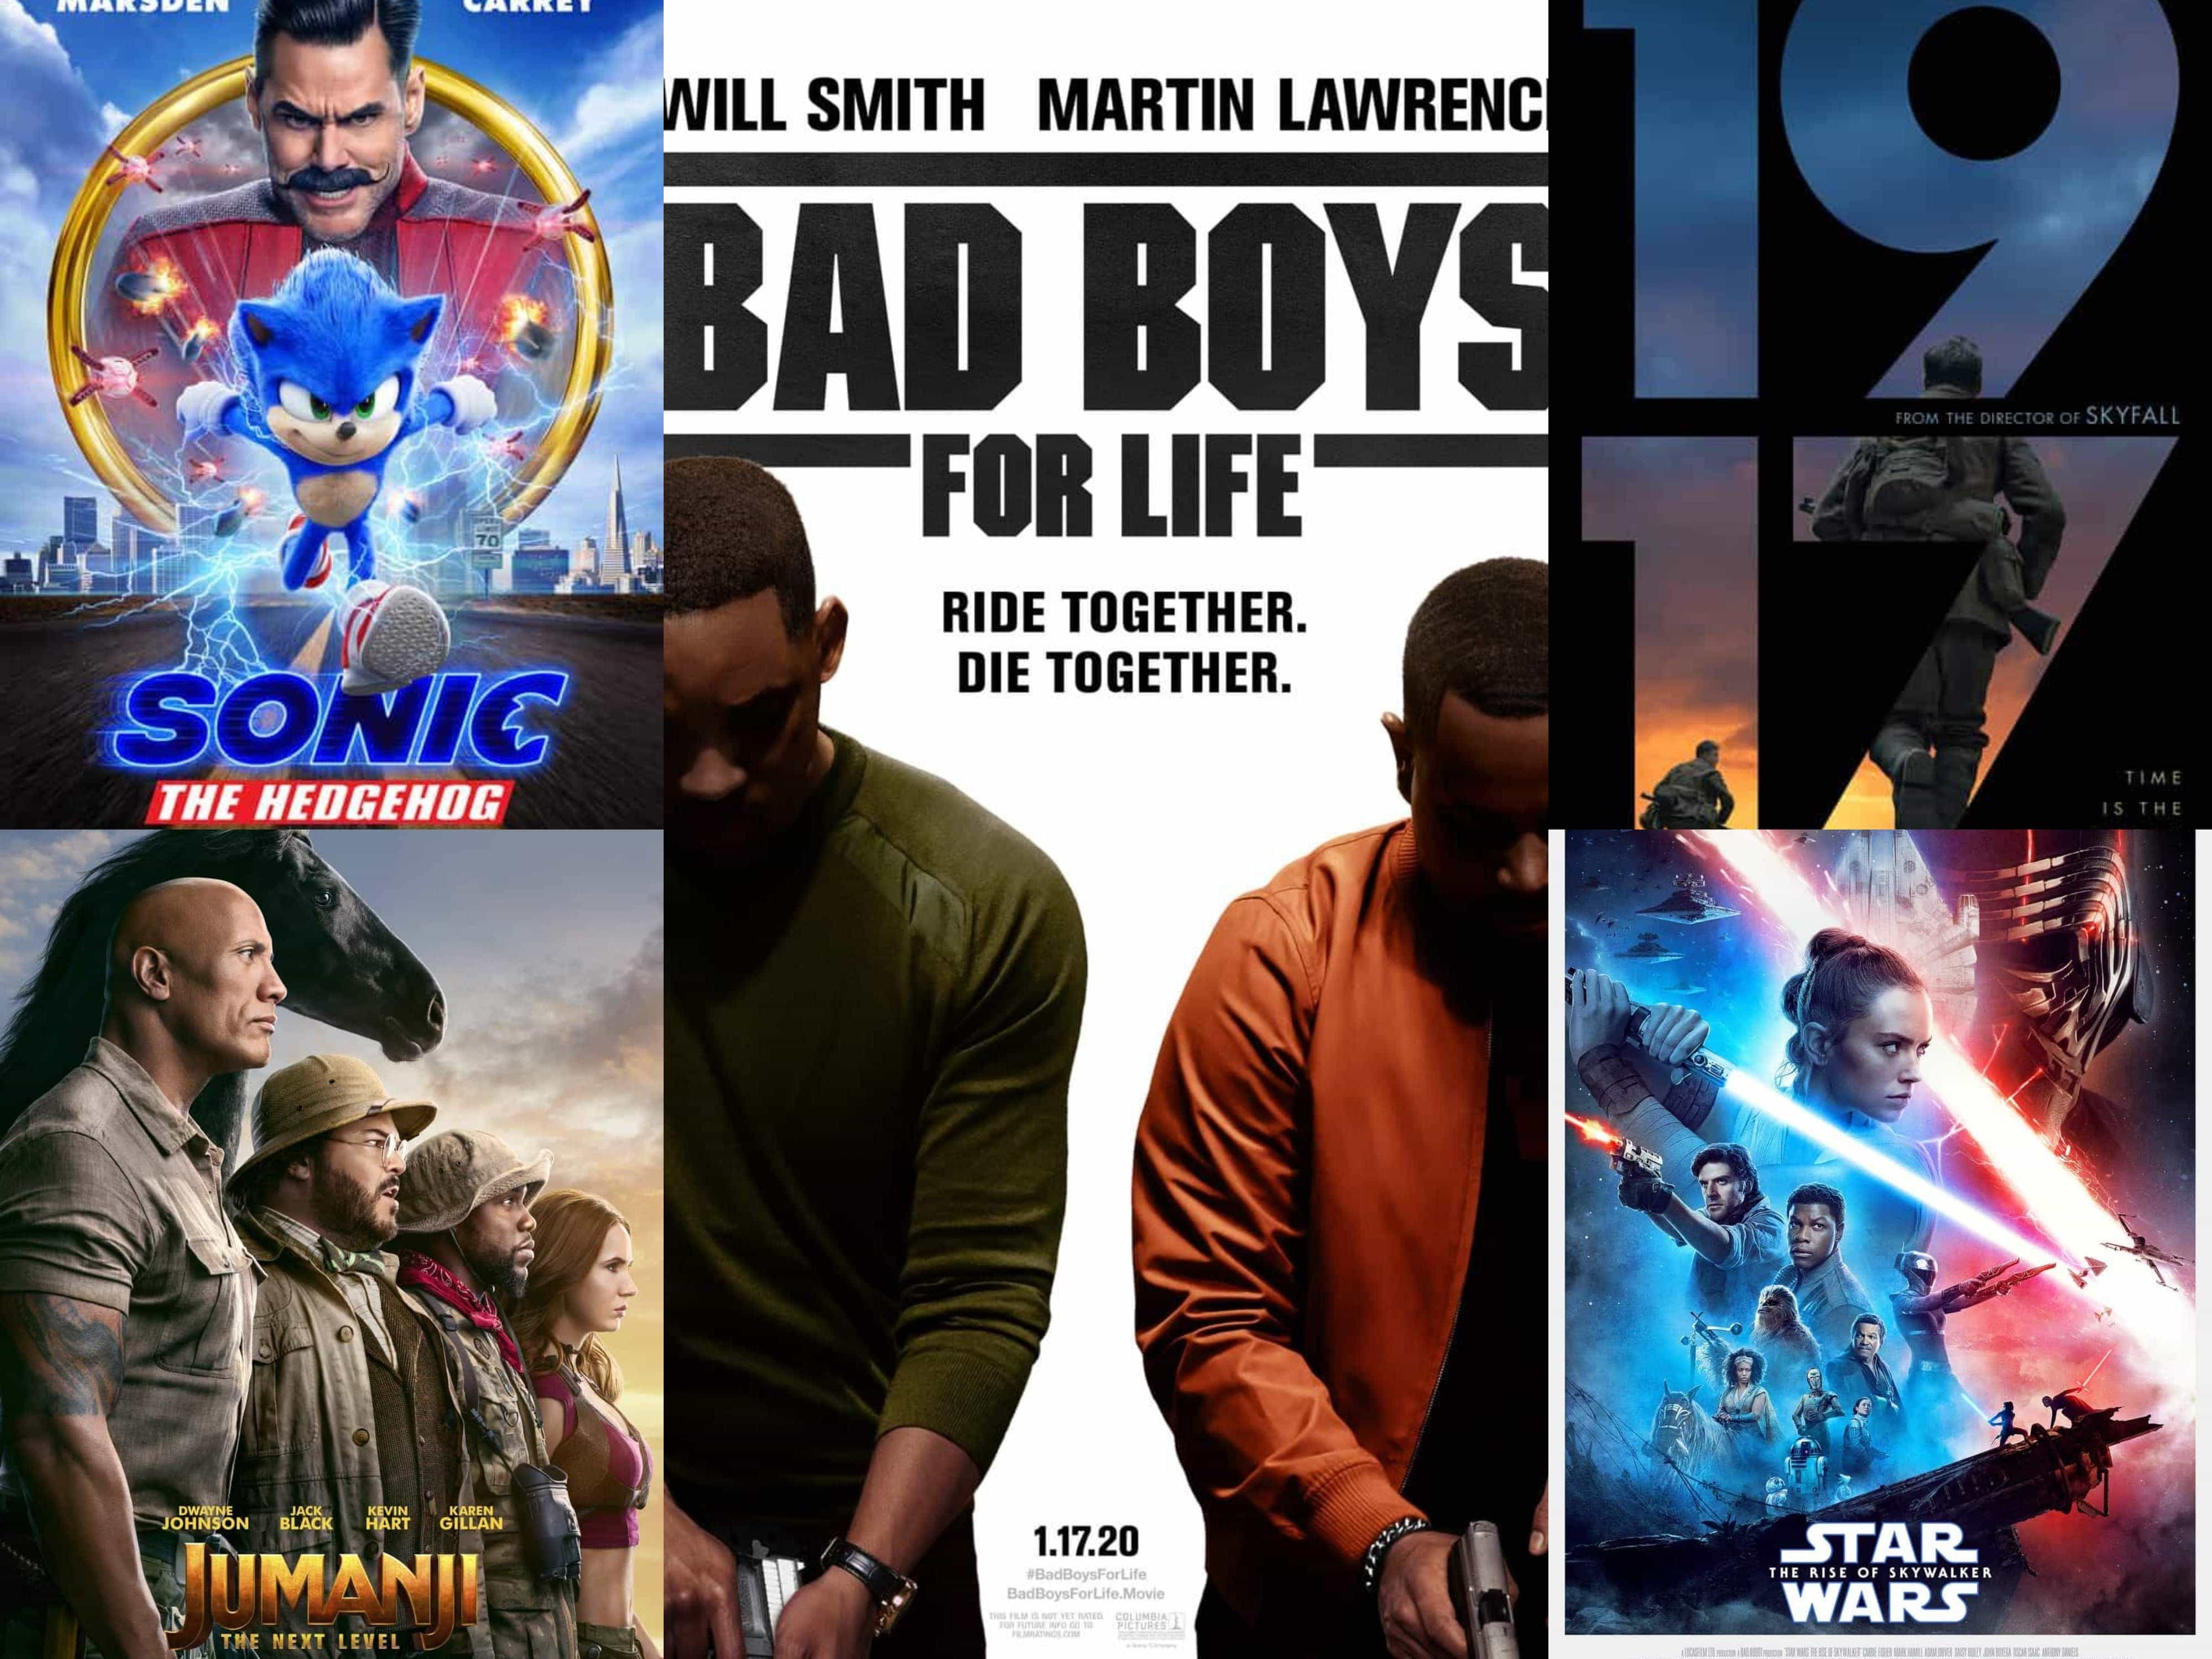 Top Grossing Movies 2020 US -  After a year of cinema closures and then screens with limited capacity, Bad Boys For Life is the top grossing movie in the US